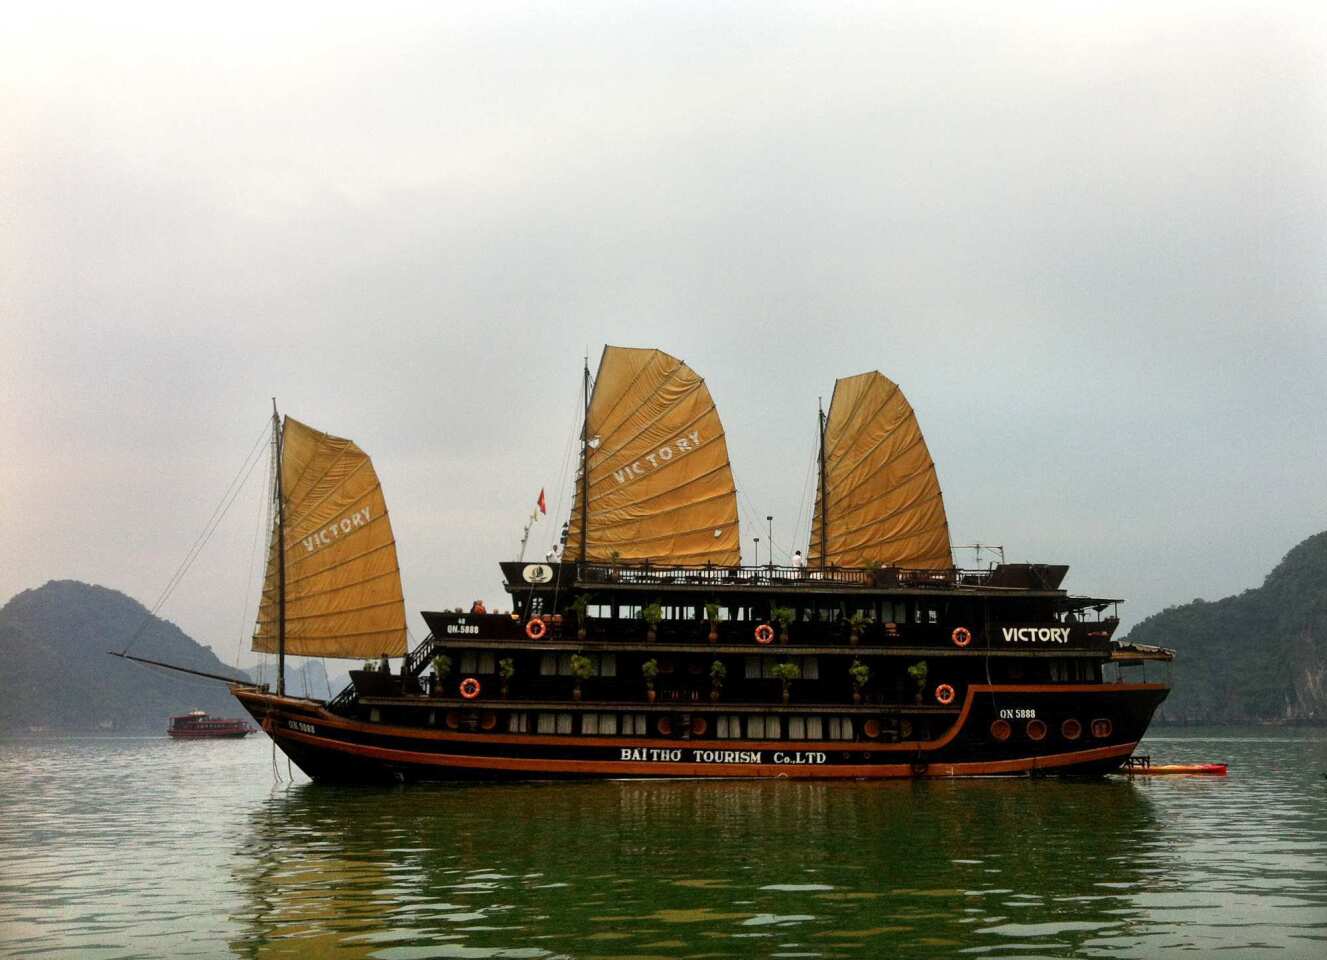 A junk cruise ship raises its eye-catching sails as it plies the emerald waters of Halong Bay, Vietnam. A kayak roped to the back of the ship can be rented to paddle to a little islet filled with monkeys.